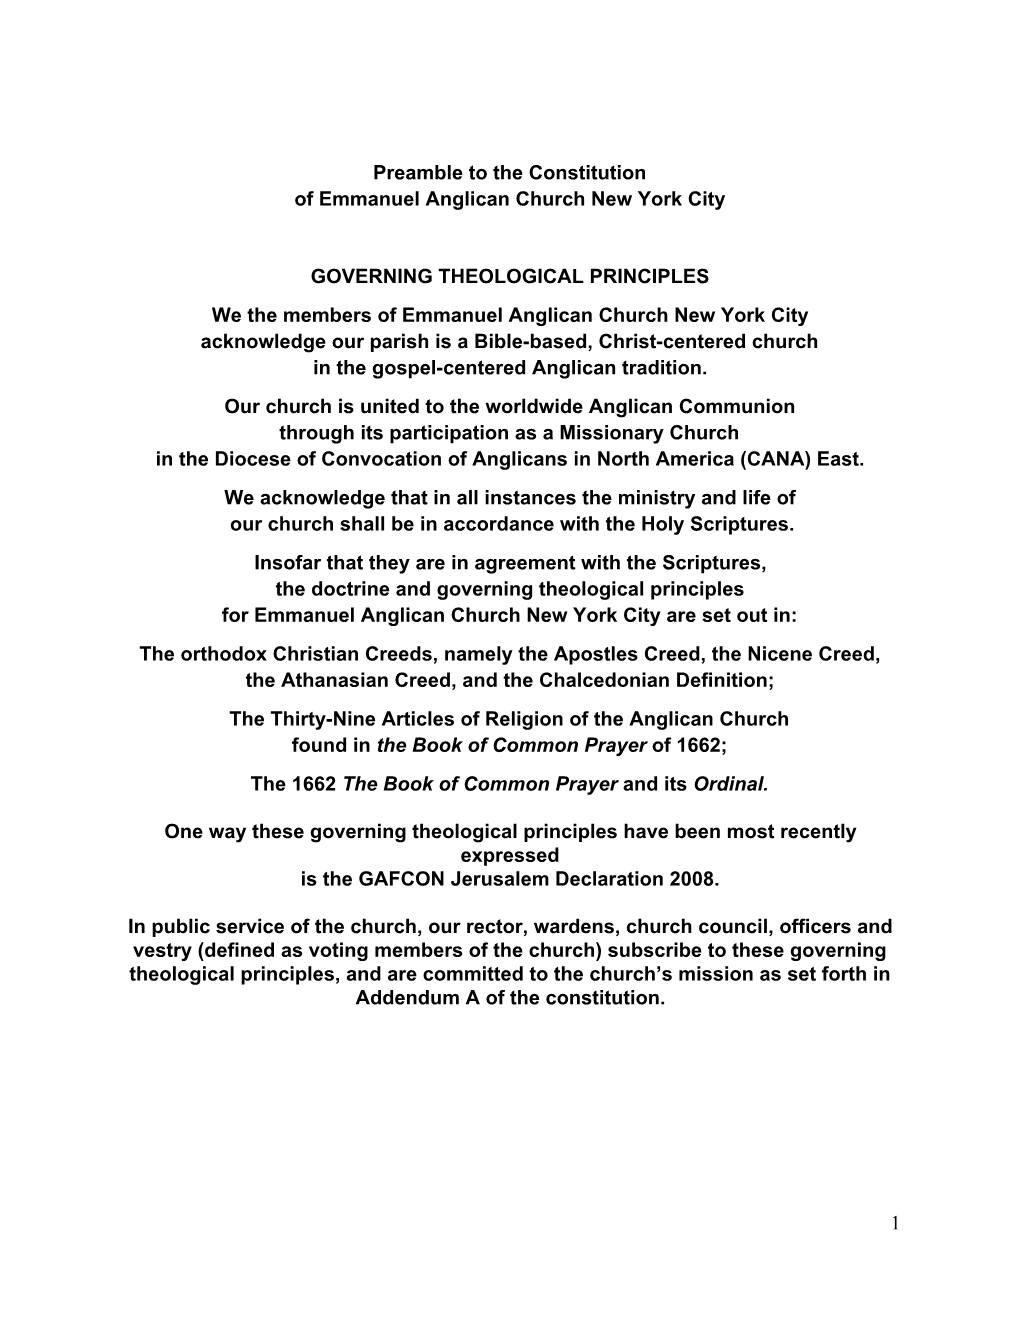 Preamble to the Constitution of Emmanuel Anglican Church New York City